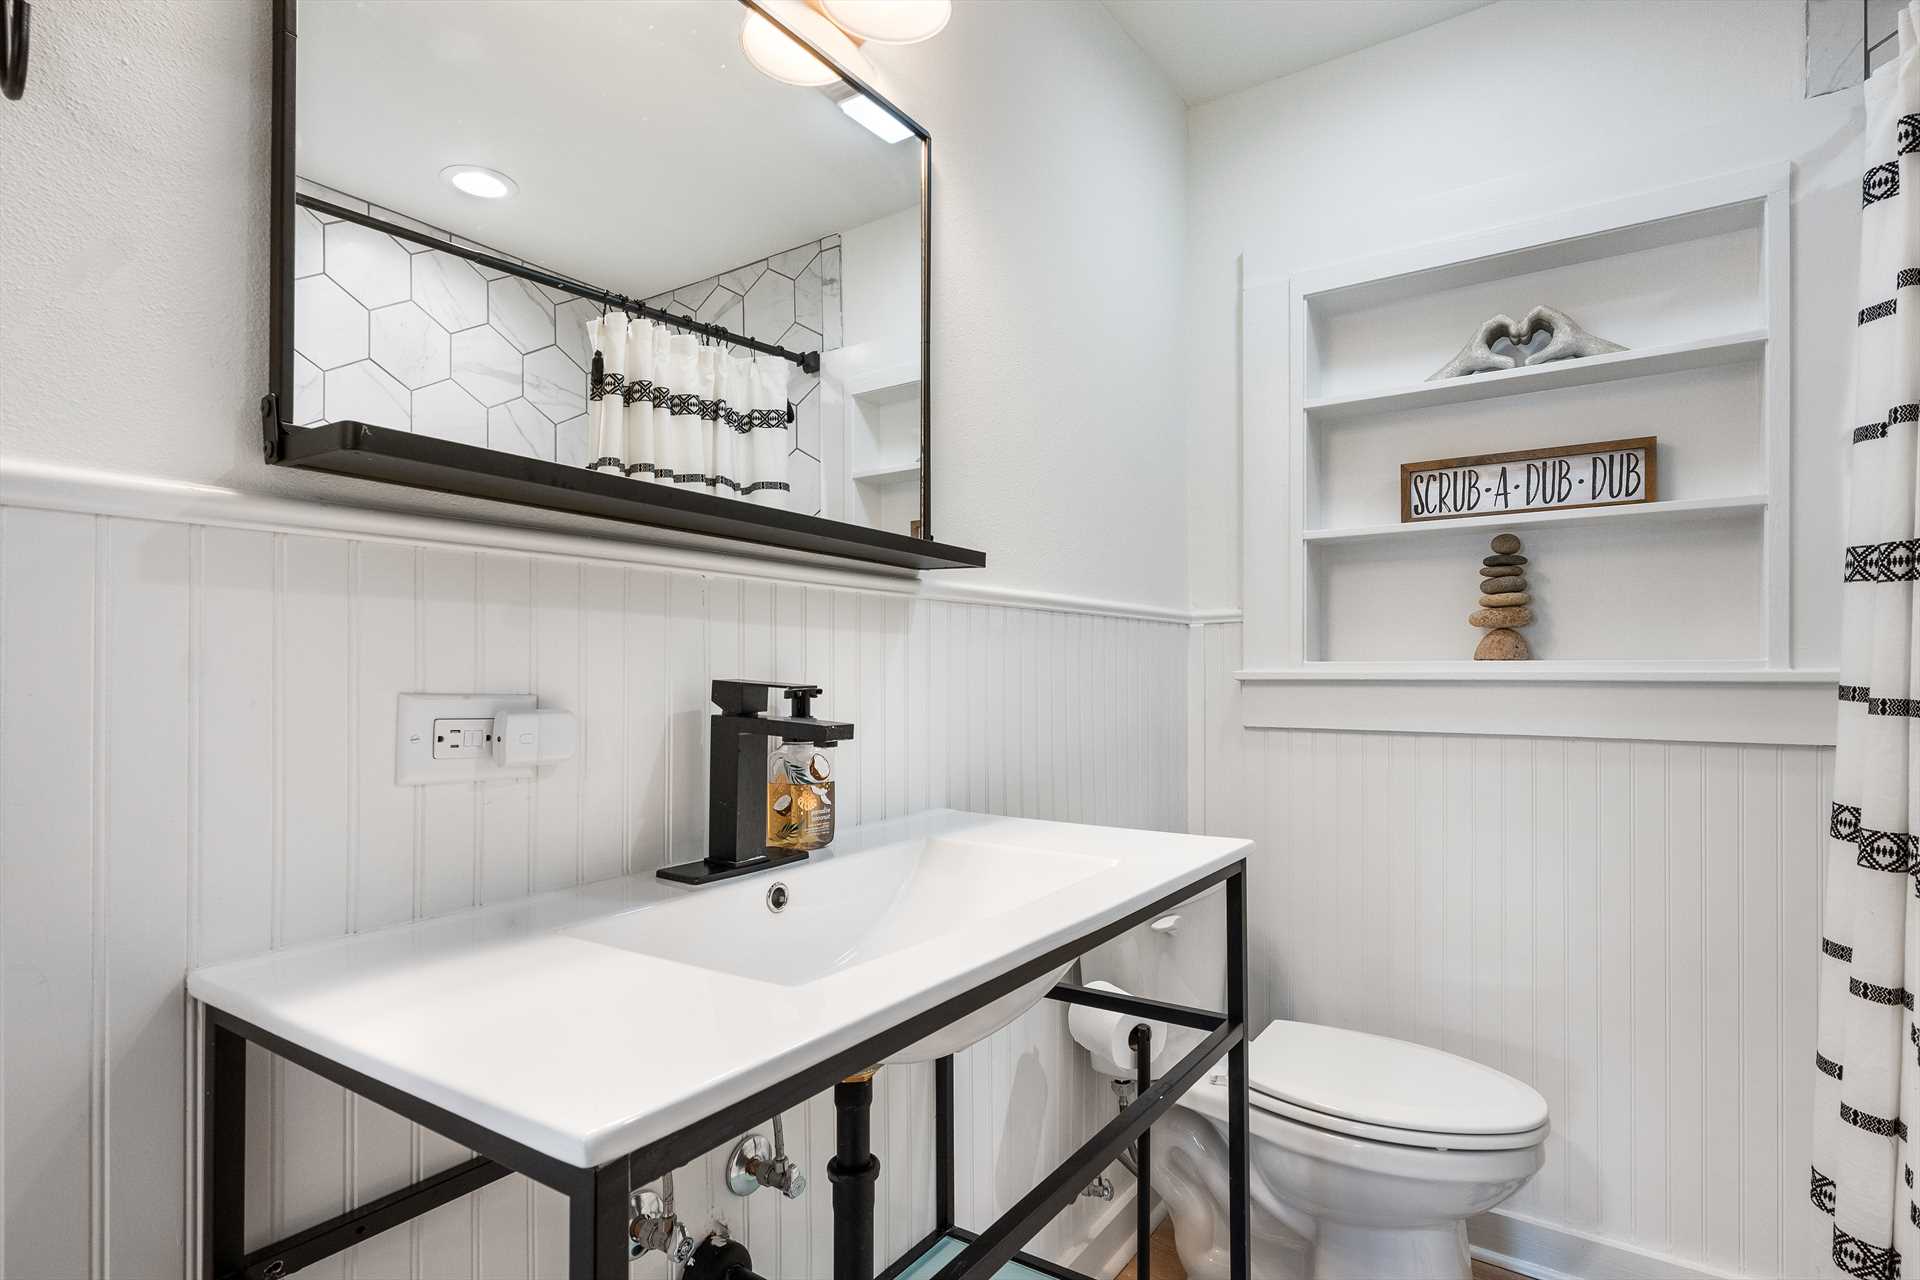                                                 The master bath includes a vanity with plenty of counter space, a shower and tub combo, and fresh and fluffy linens.